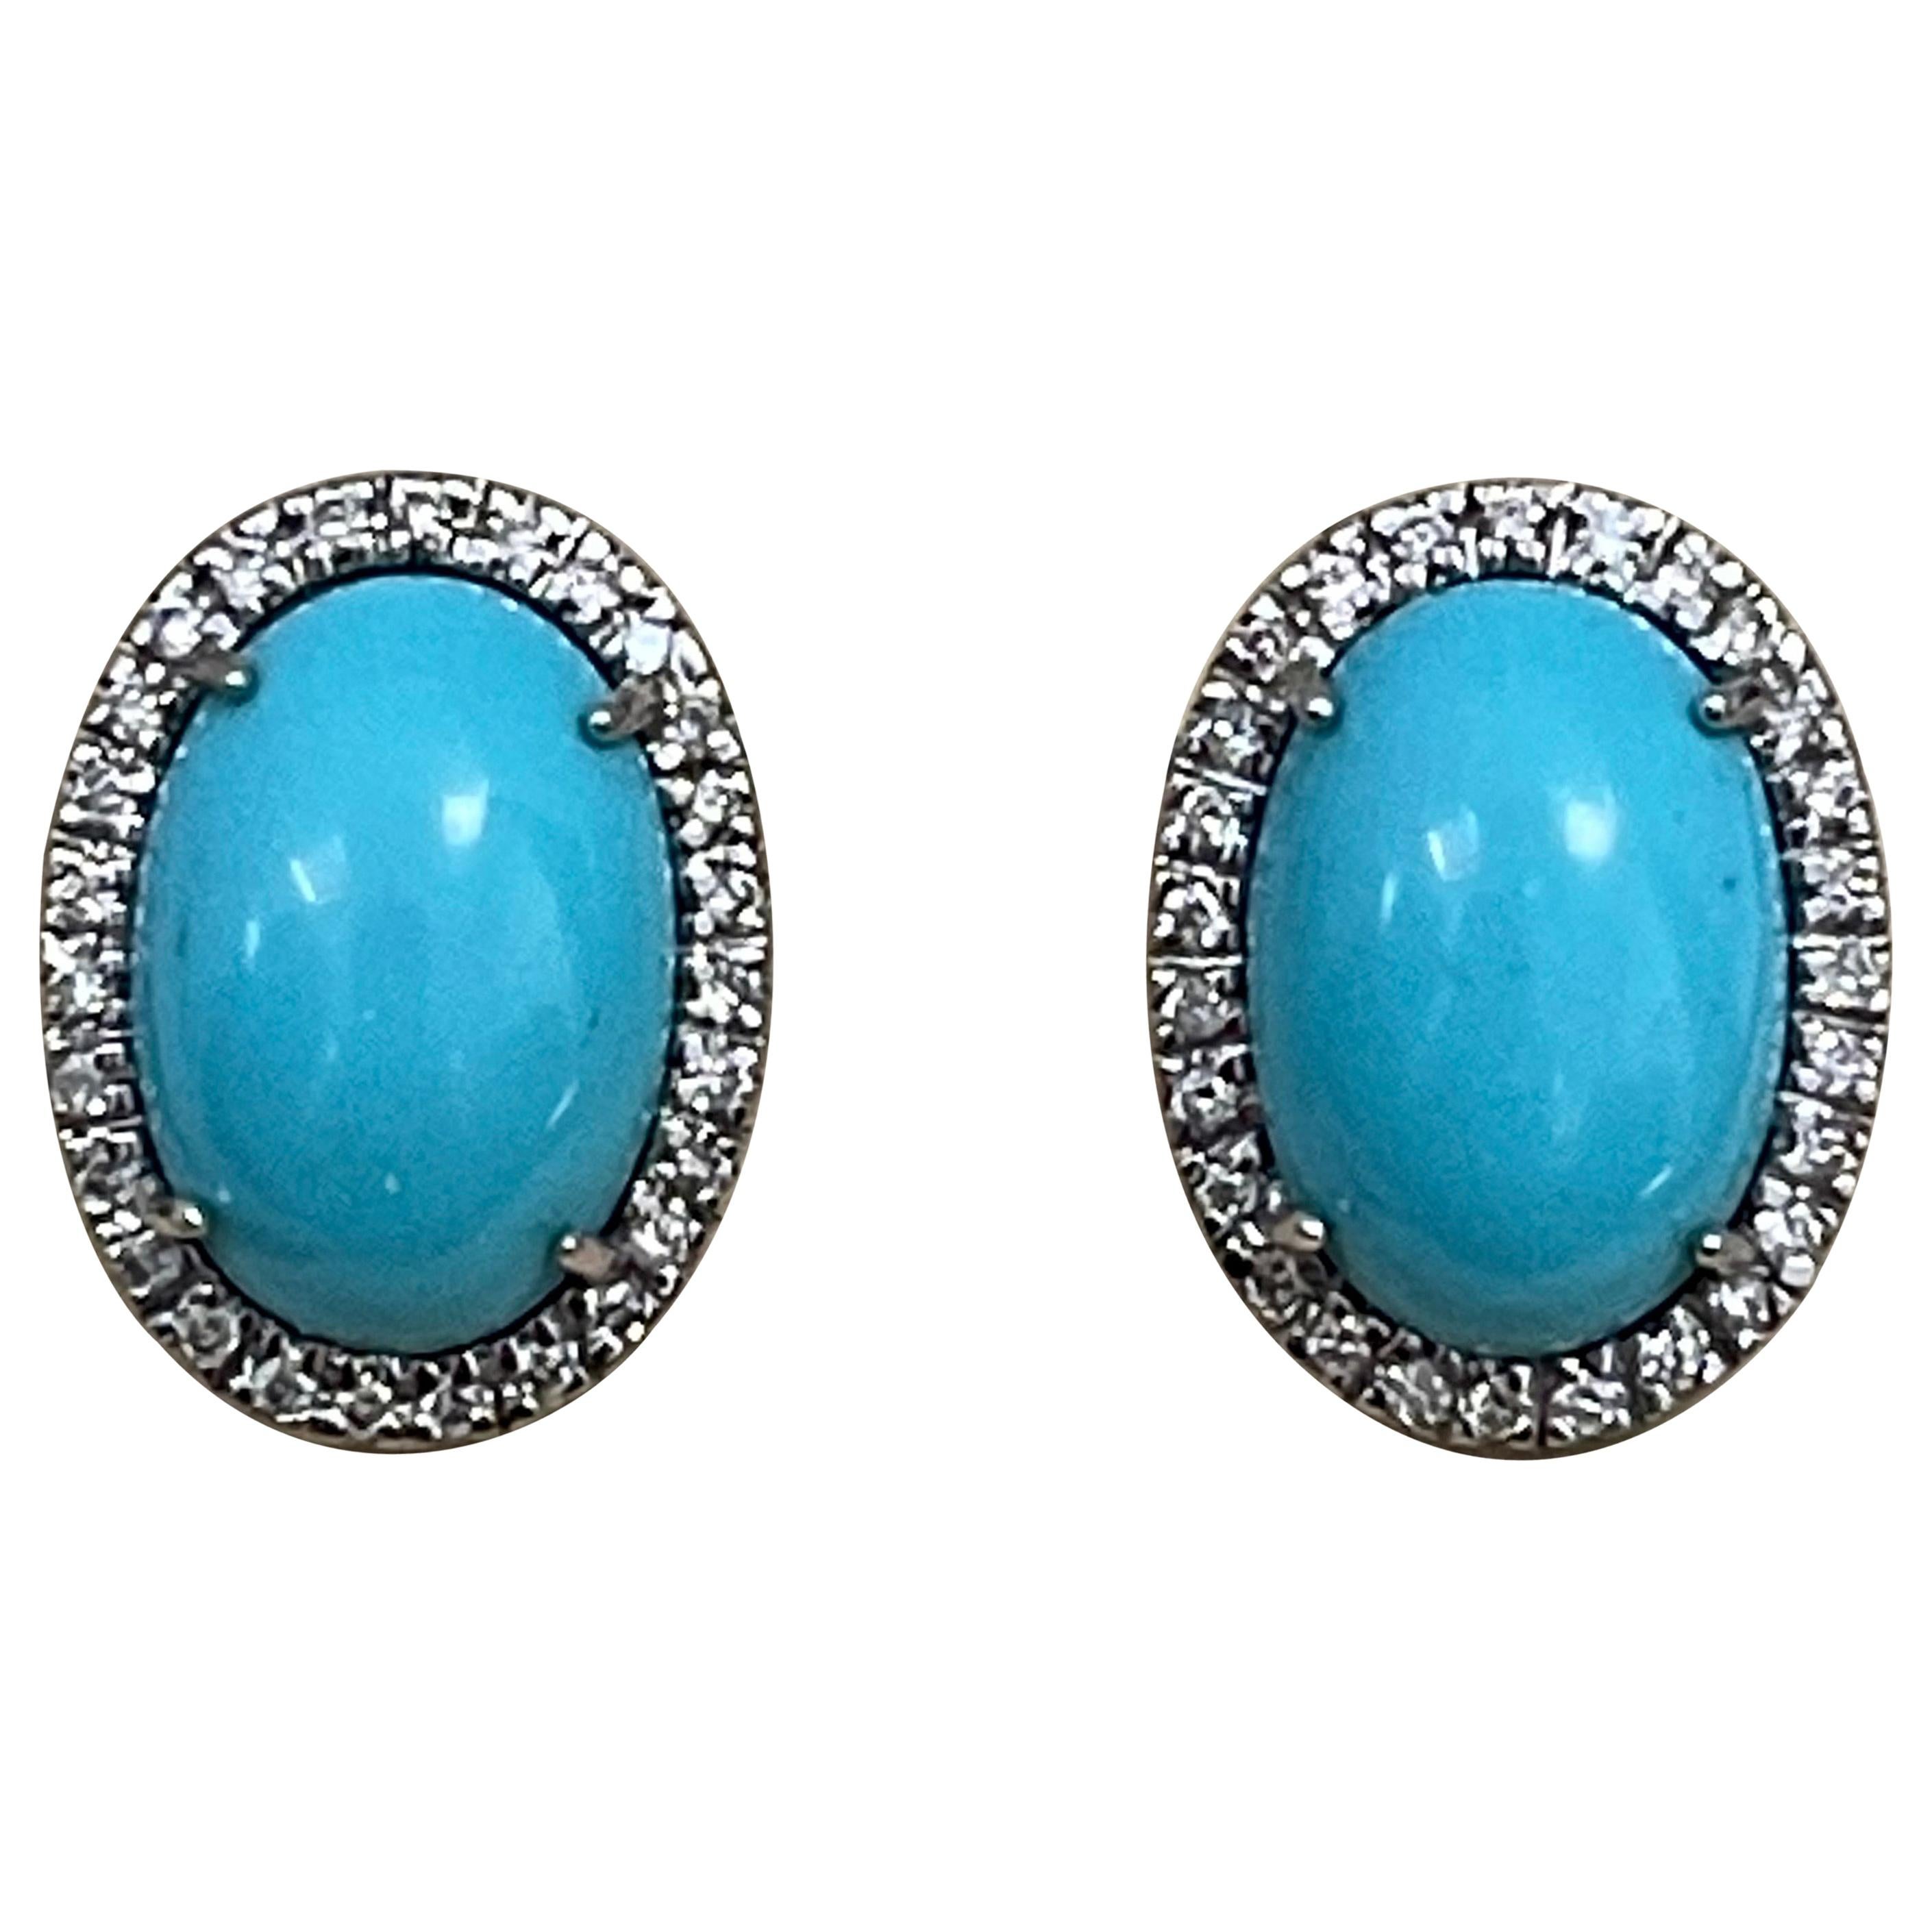 Oval Turquoise and Diamond Stud Earring with Omega Back, 14 Karat White Gold